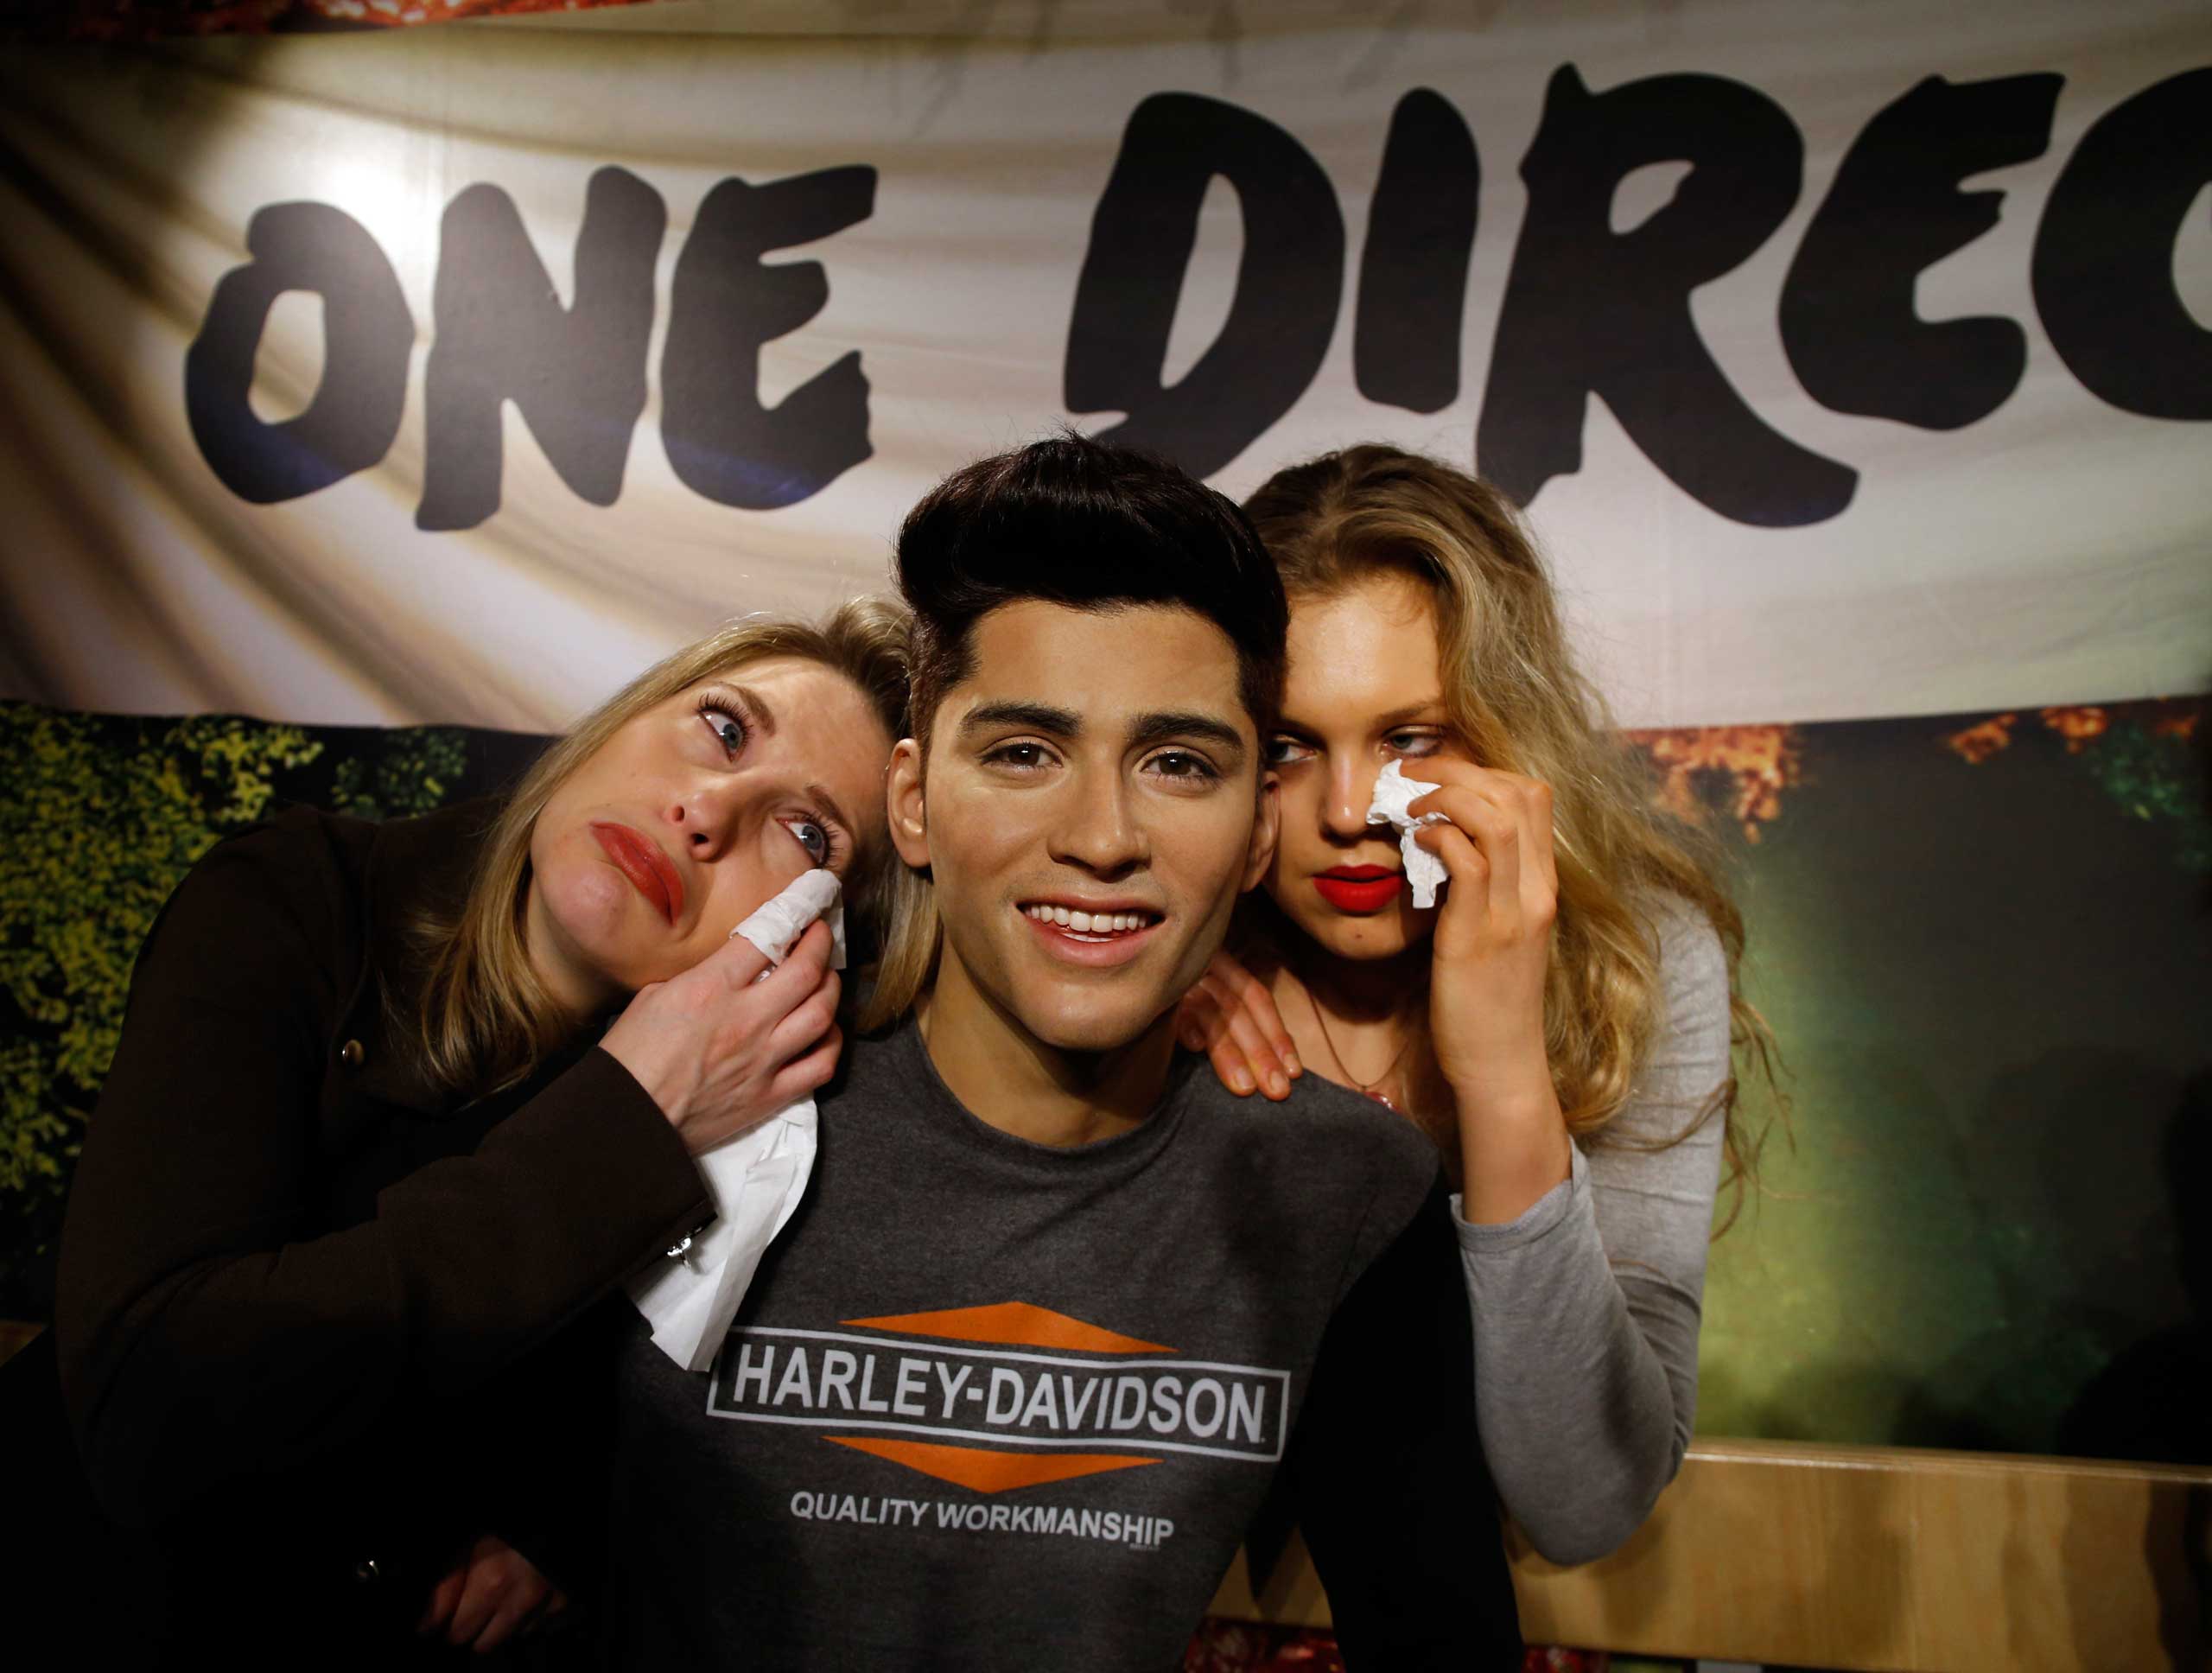 One Direction fans Laura Tokely and Lindsay Ringette wipe away tears following the news of the departure of Zayn Malik from One Direction on March 31, 2015 in London, England. (Alex B. Huckle—Getty Images)